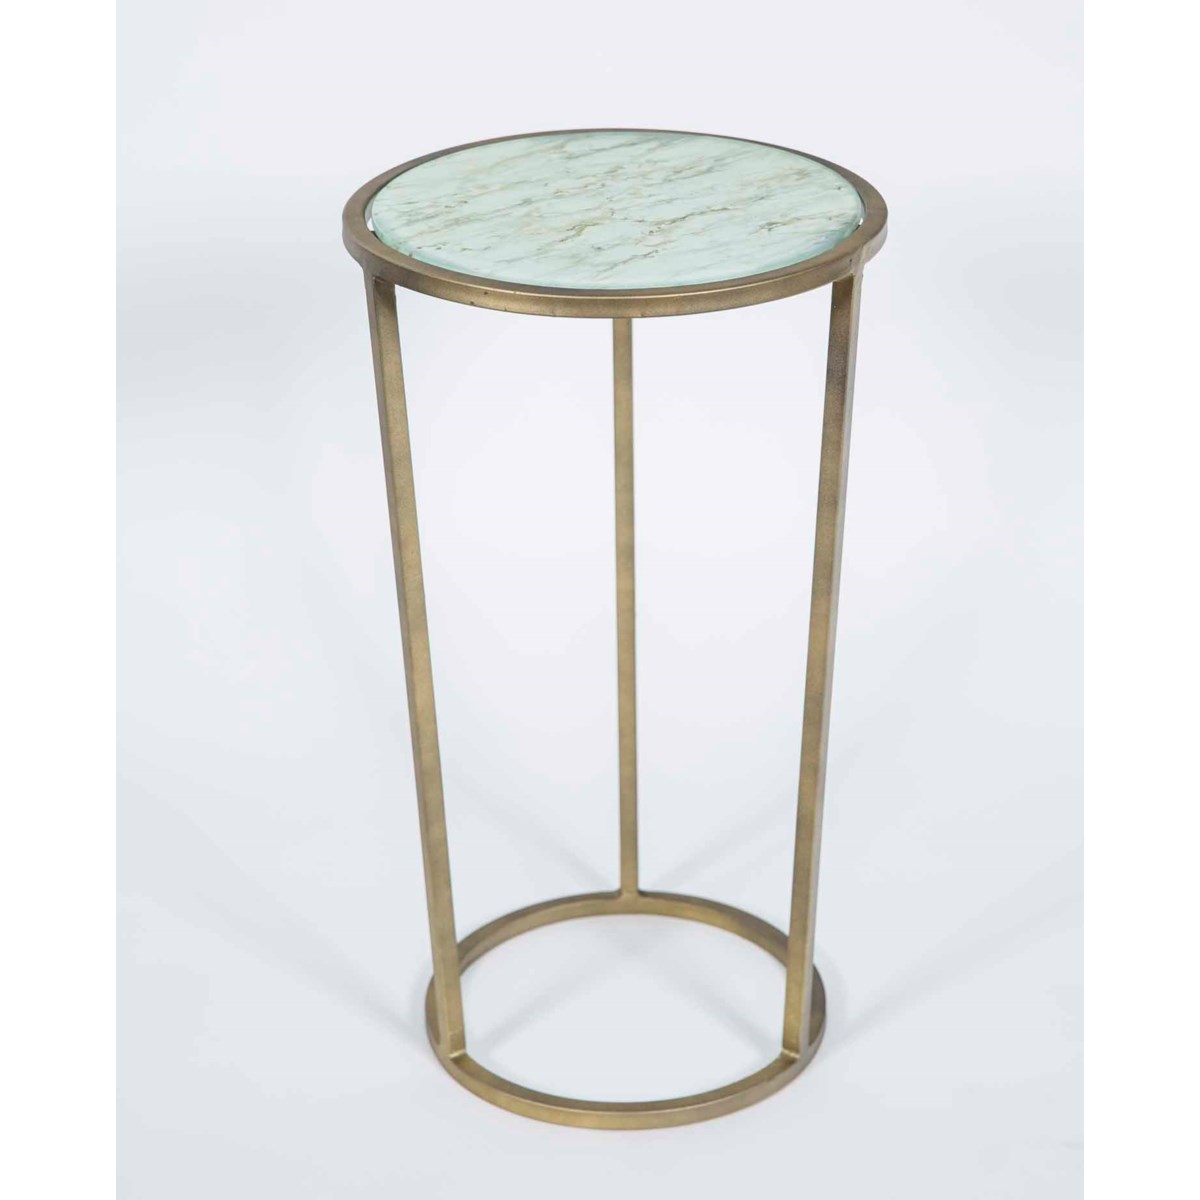 Samuel Accent Table in Antique Brass with Shelf in Wrinkled Linen Finish